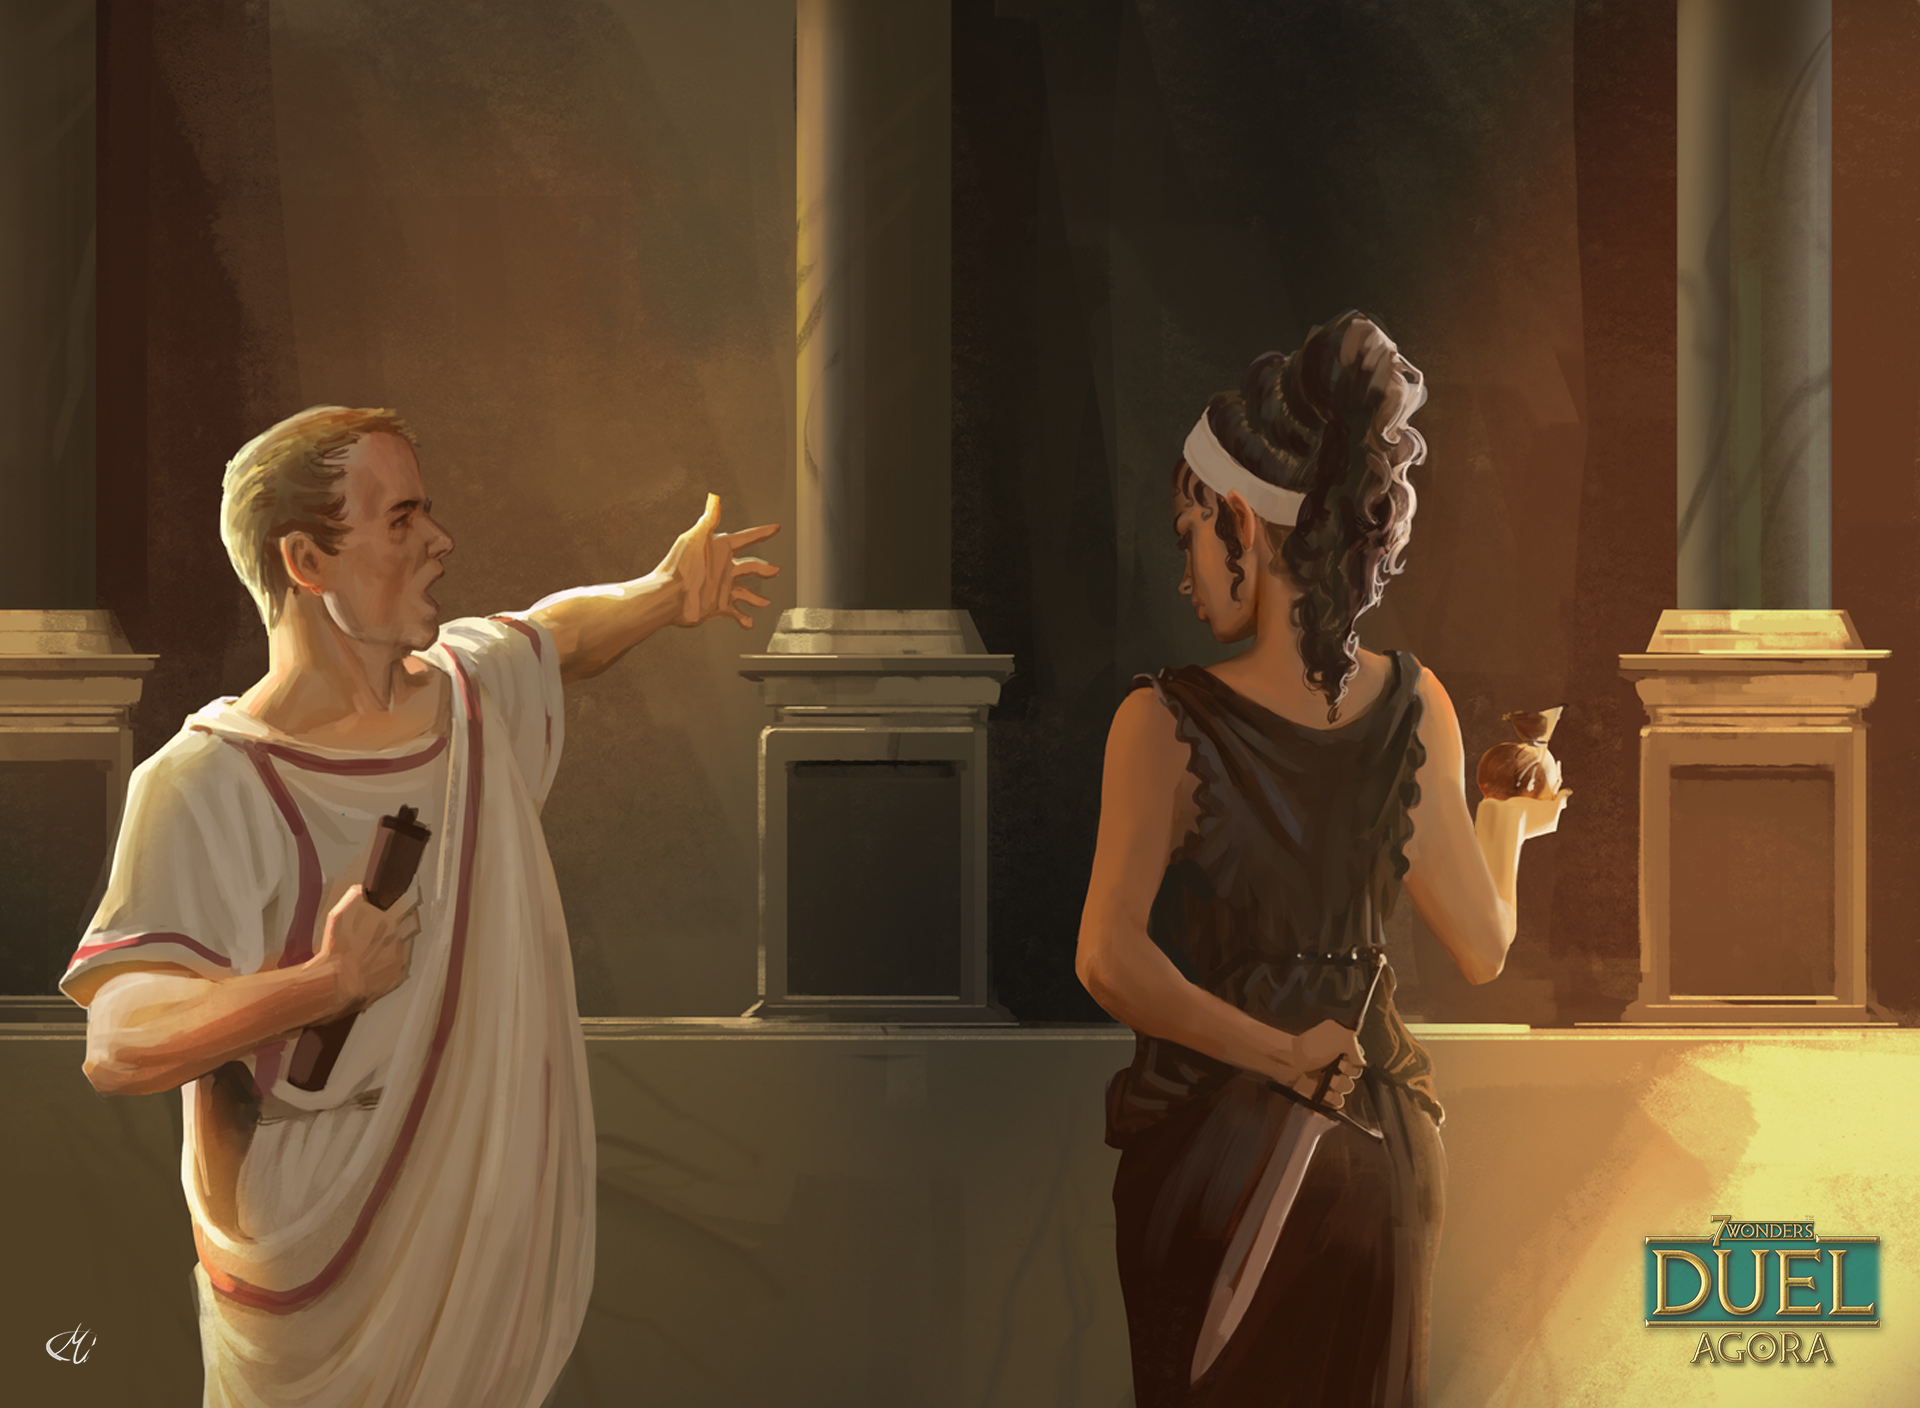 Control The Senate With 7 Wonders Duel Agora Repos Production